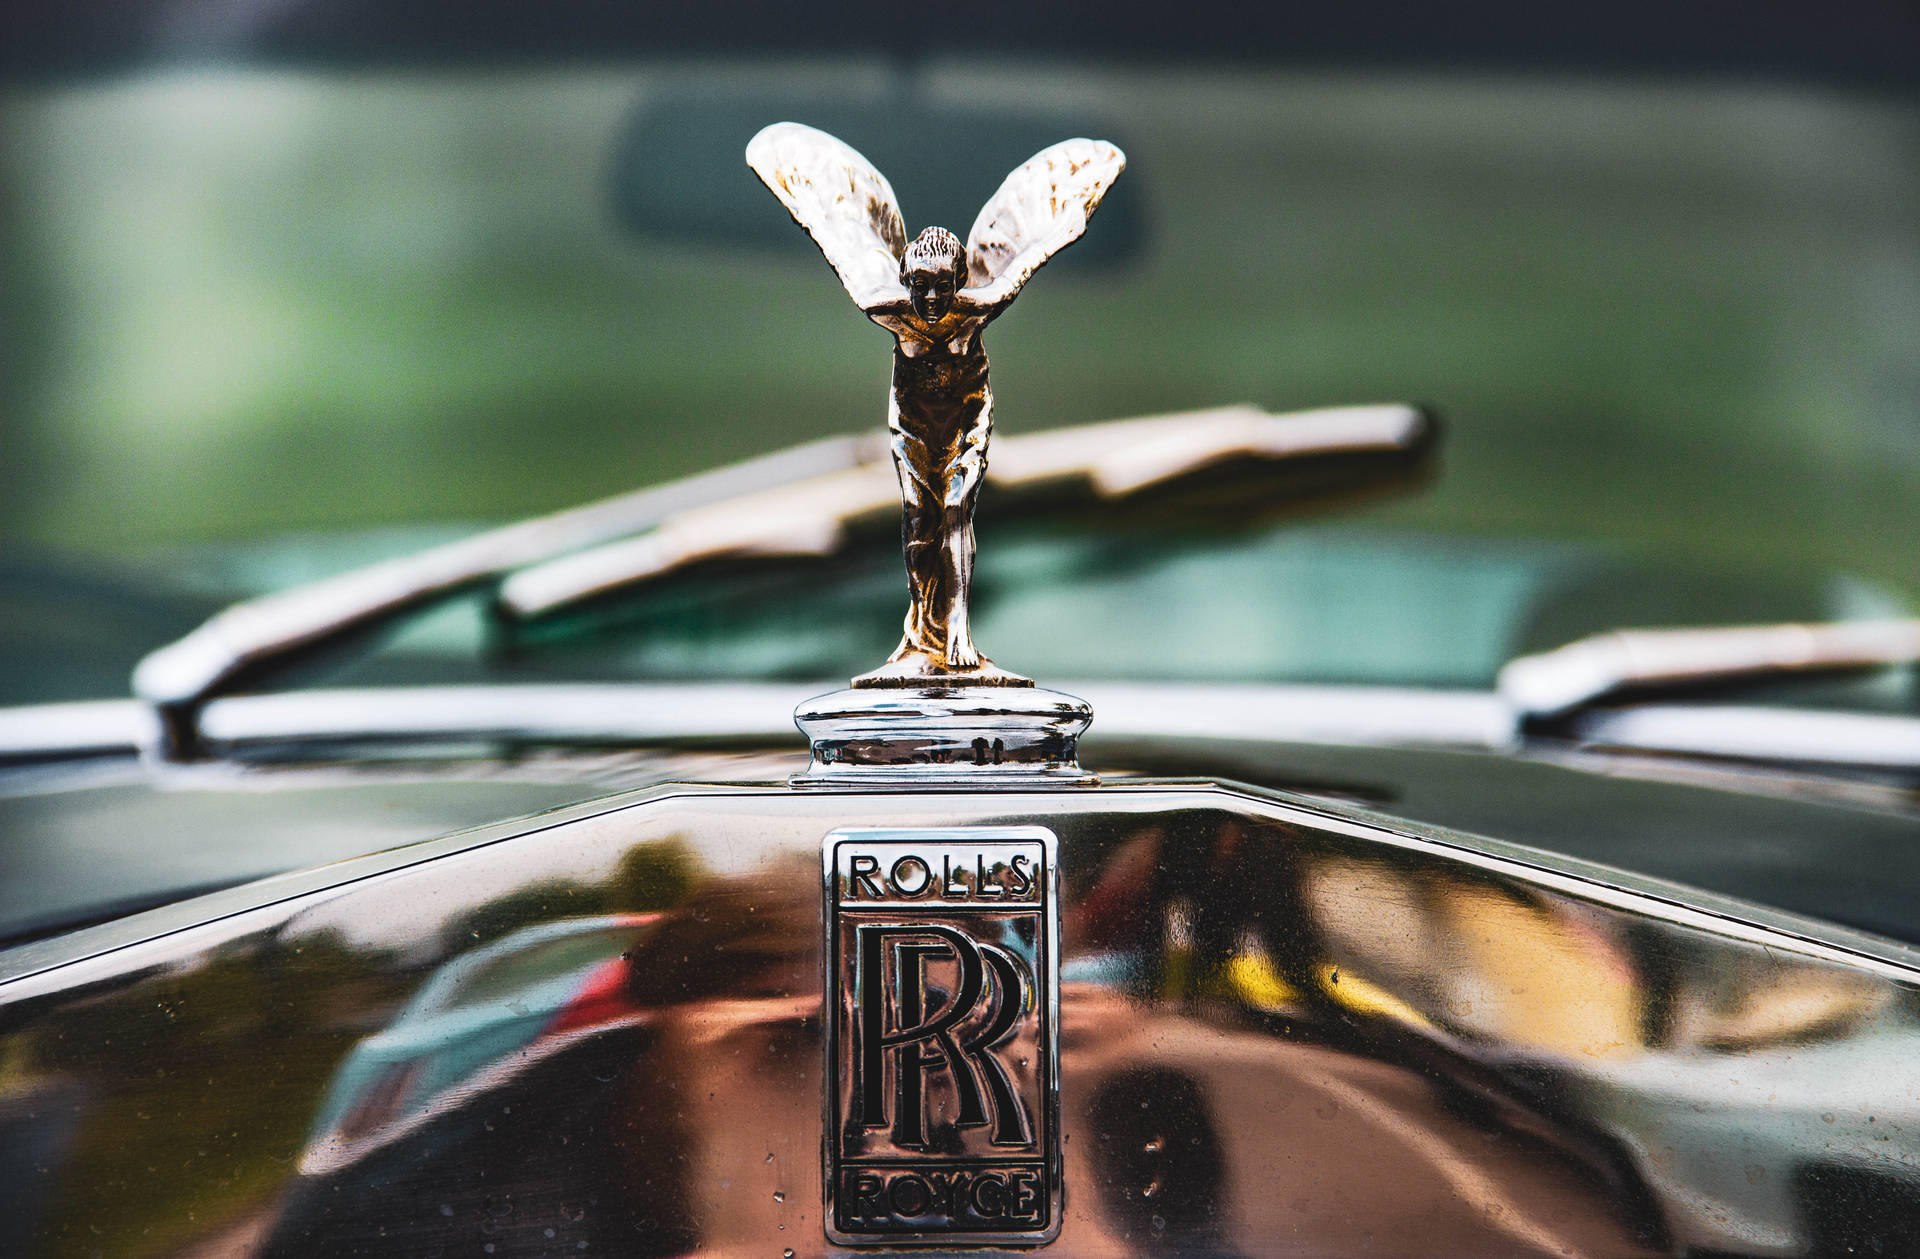 Rolls Royce 5126X3360 Wallpaper and Background Image